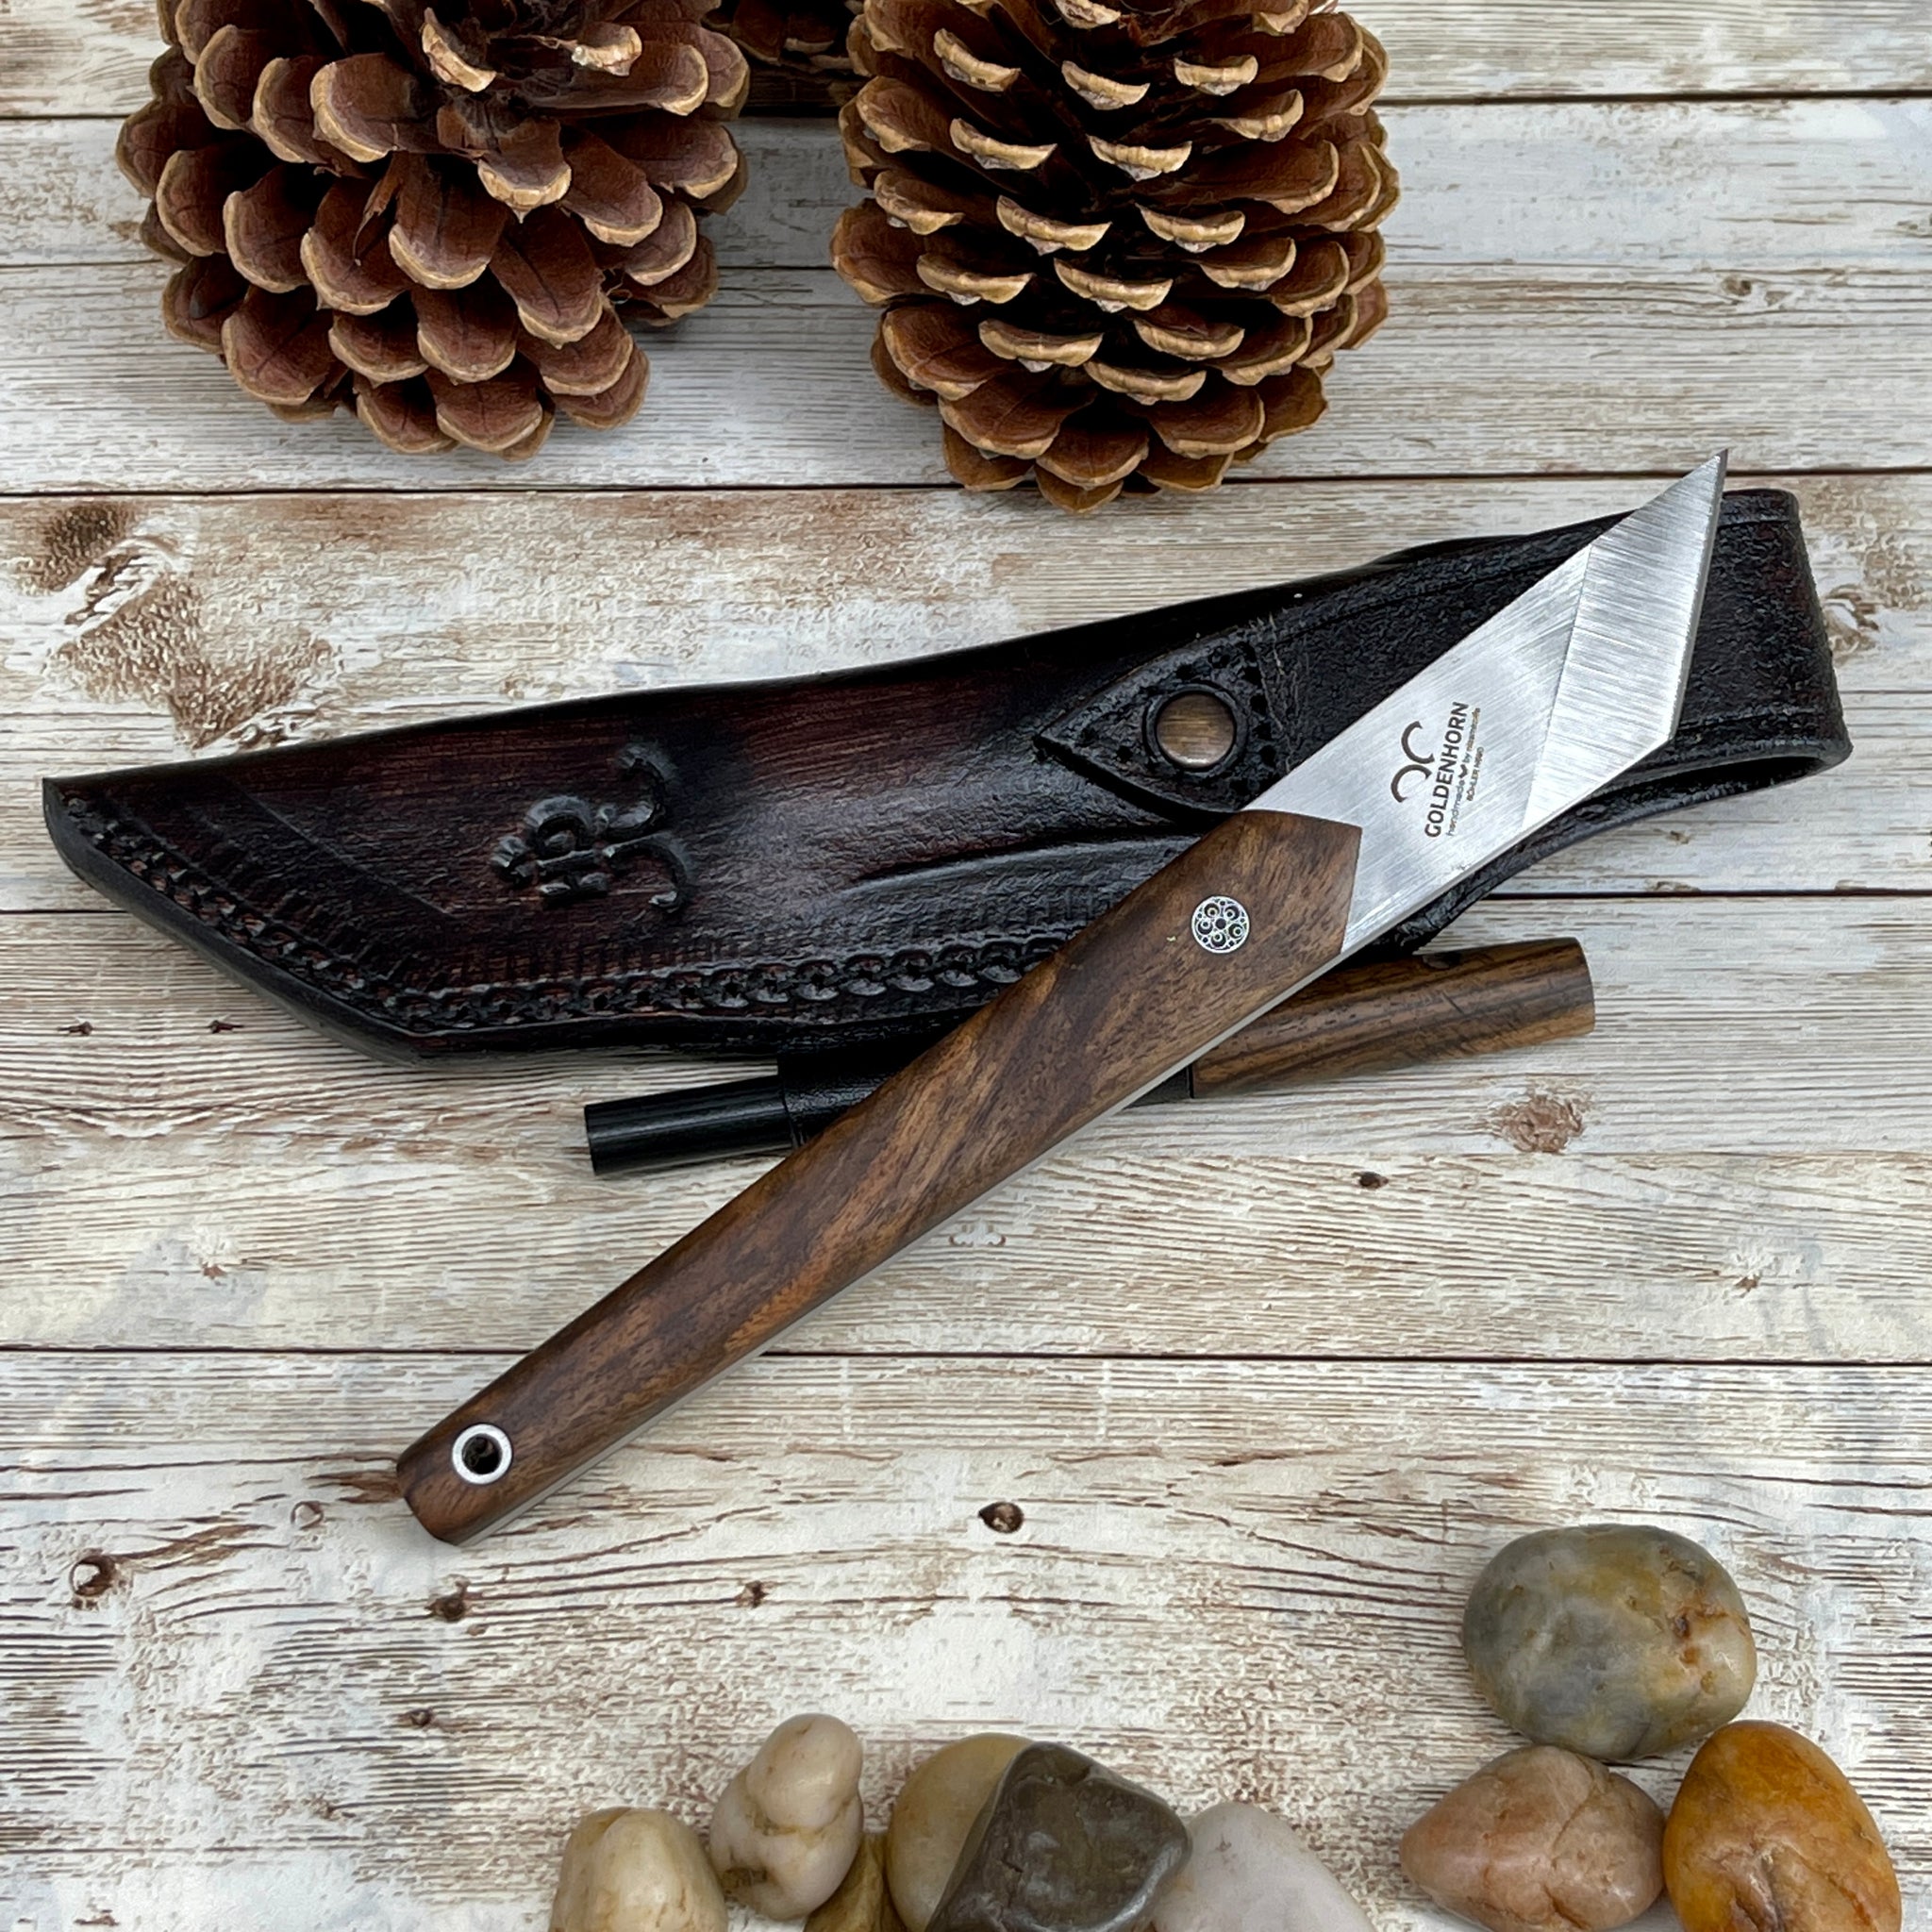 Camping Knife With Olive Wood Handle, 1/4 Inch N 690 Steel and